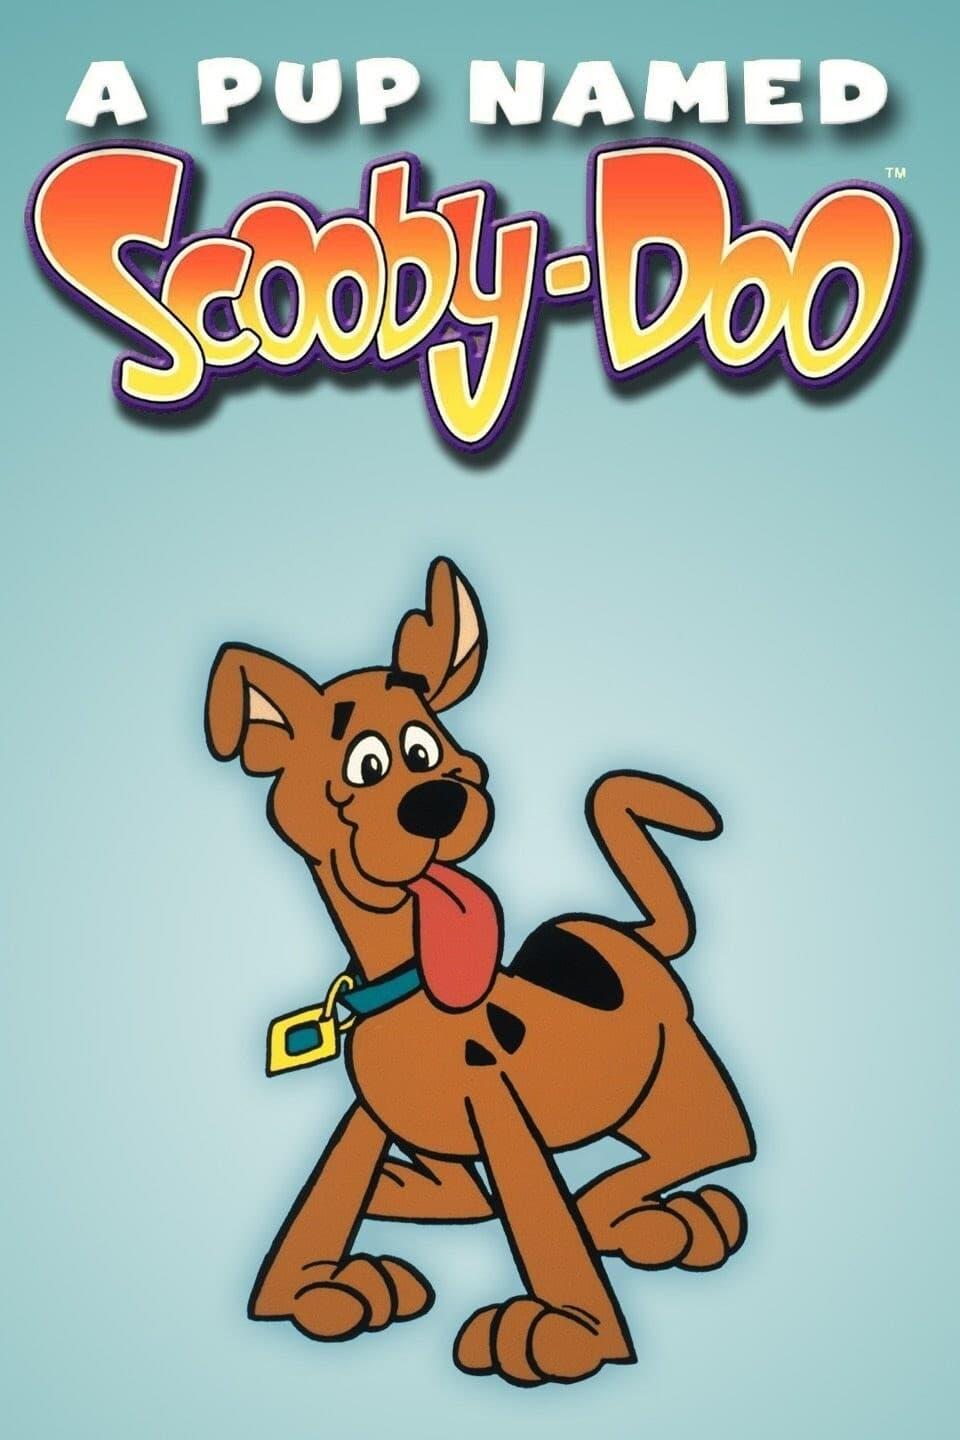 A Pup Named Scooby-Doo poster